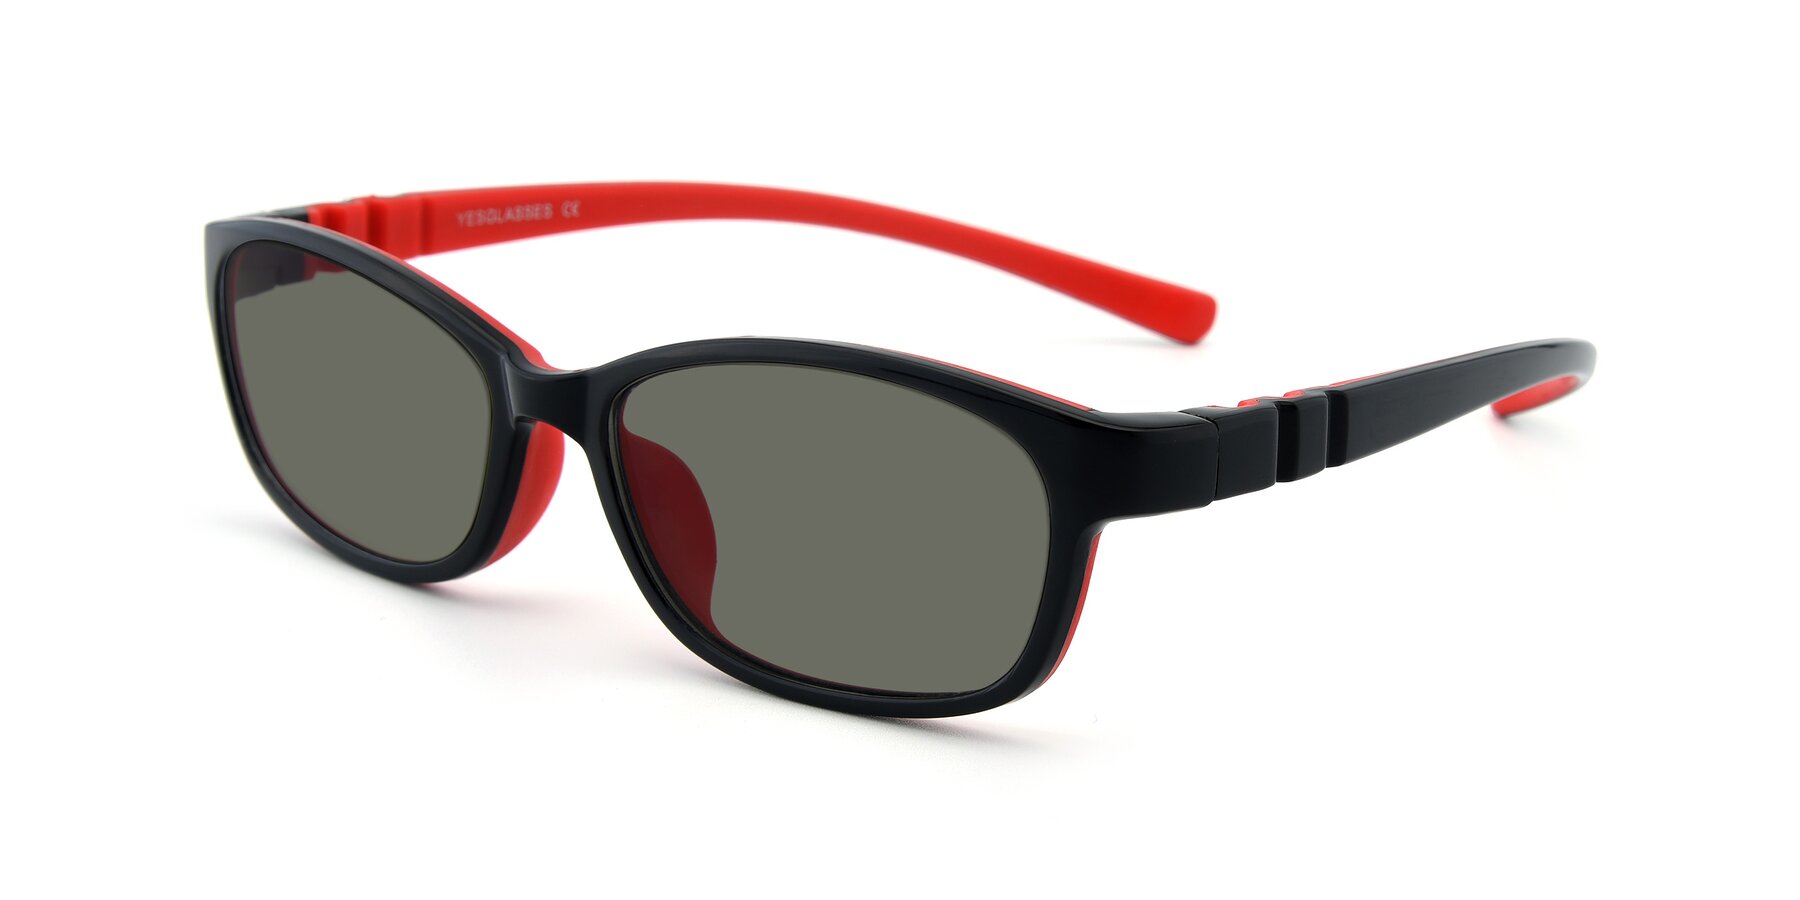 Angle of 556 in Black-Red with Gray Polarized Lenses